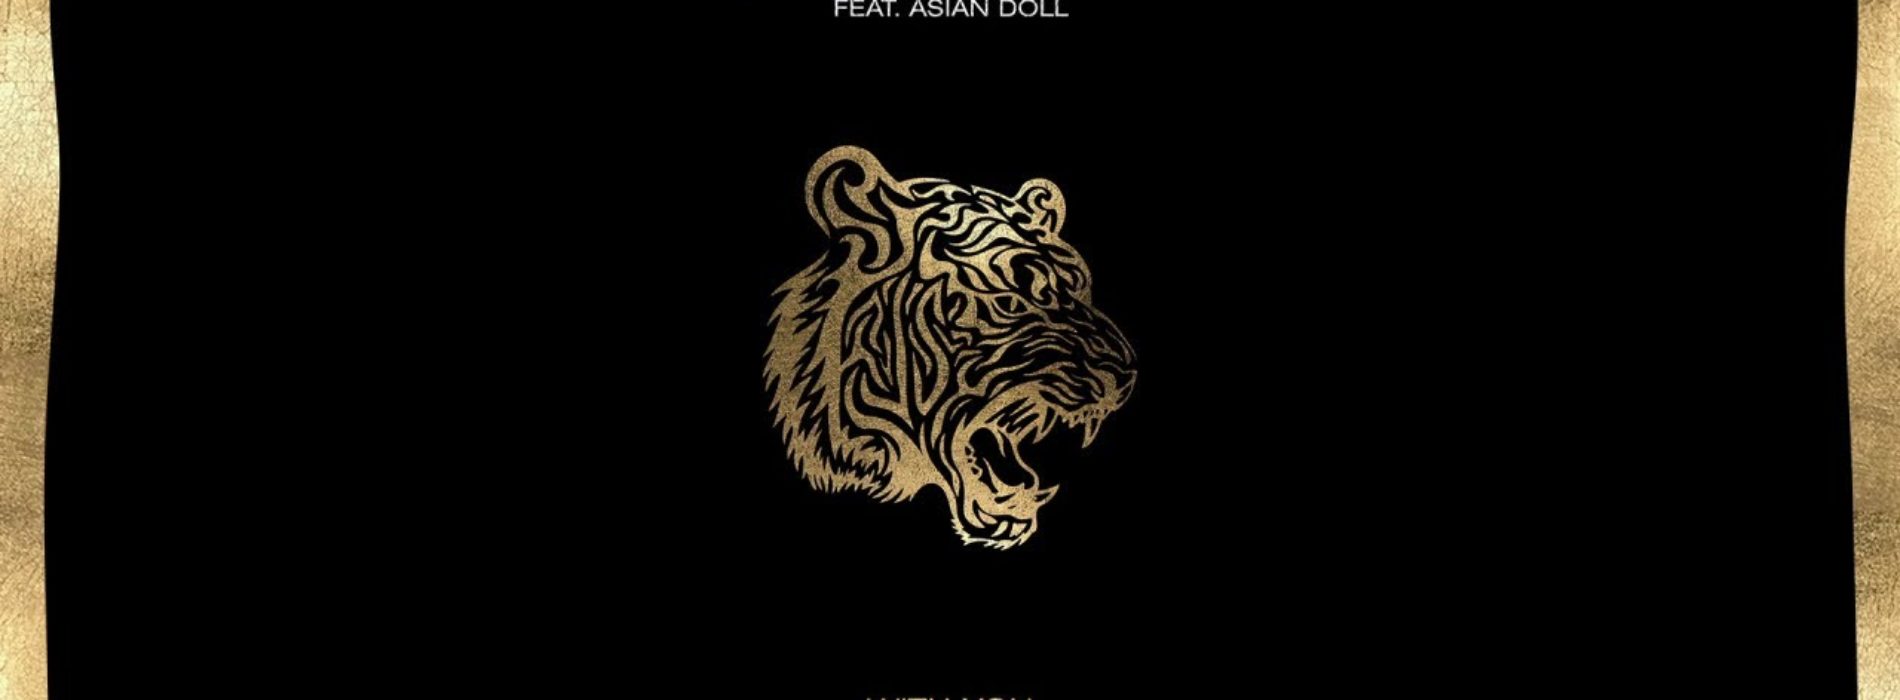 Jay Sean – With You ft. Gucci Mane, Asian Doll – Avril 2019